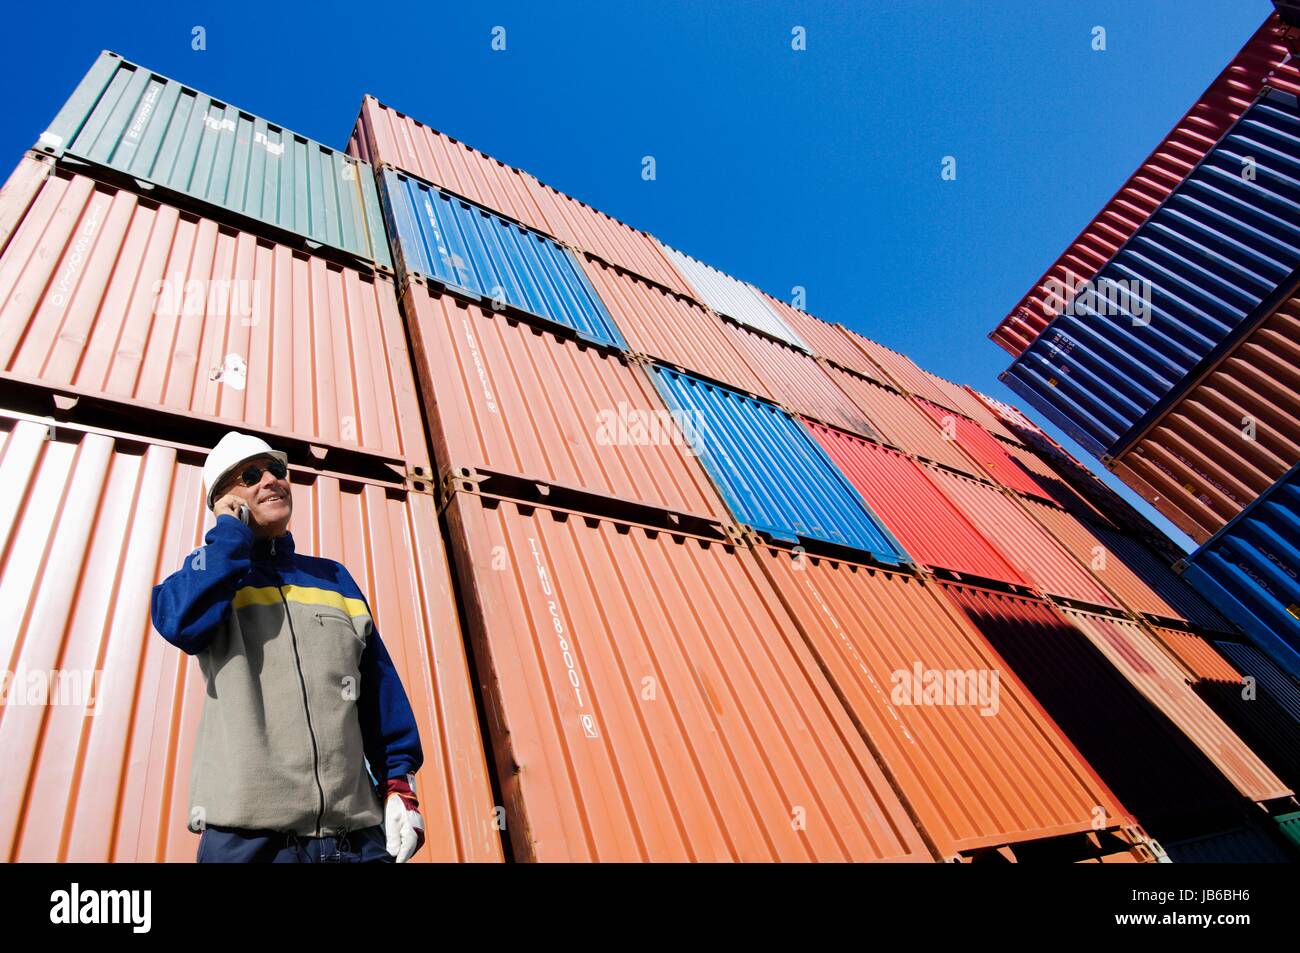 MODEL RELEASED. Man on cell phone with shipping containers. Stock Photo